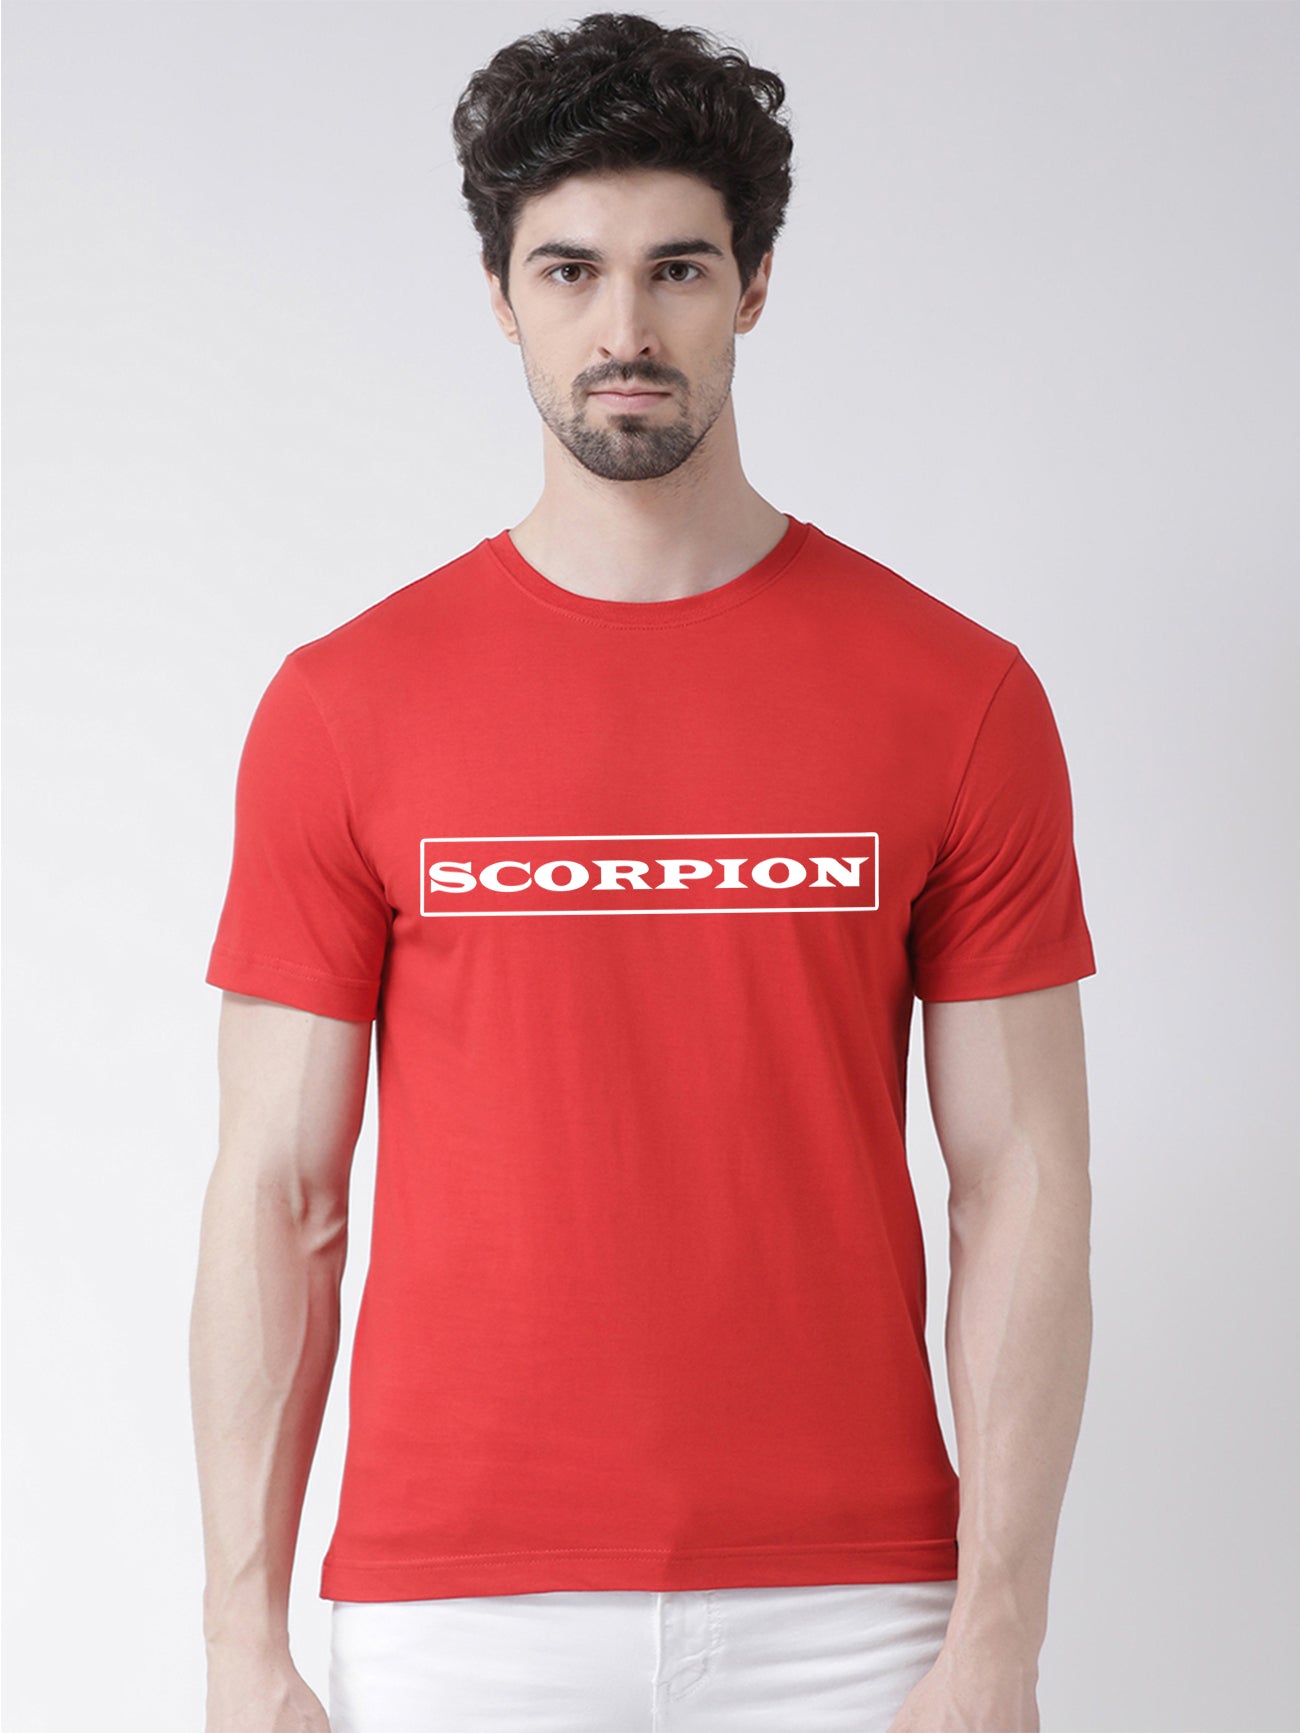 Scorpion Printed Round Neck T-shirt - Friskers